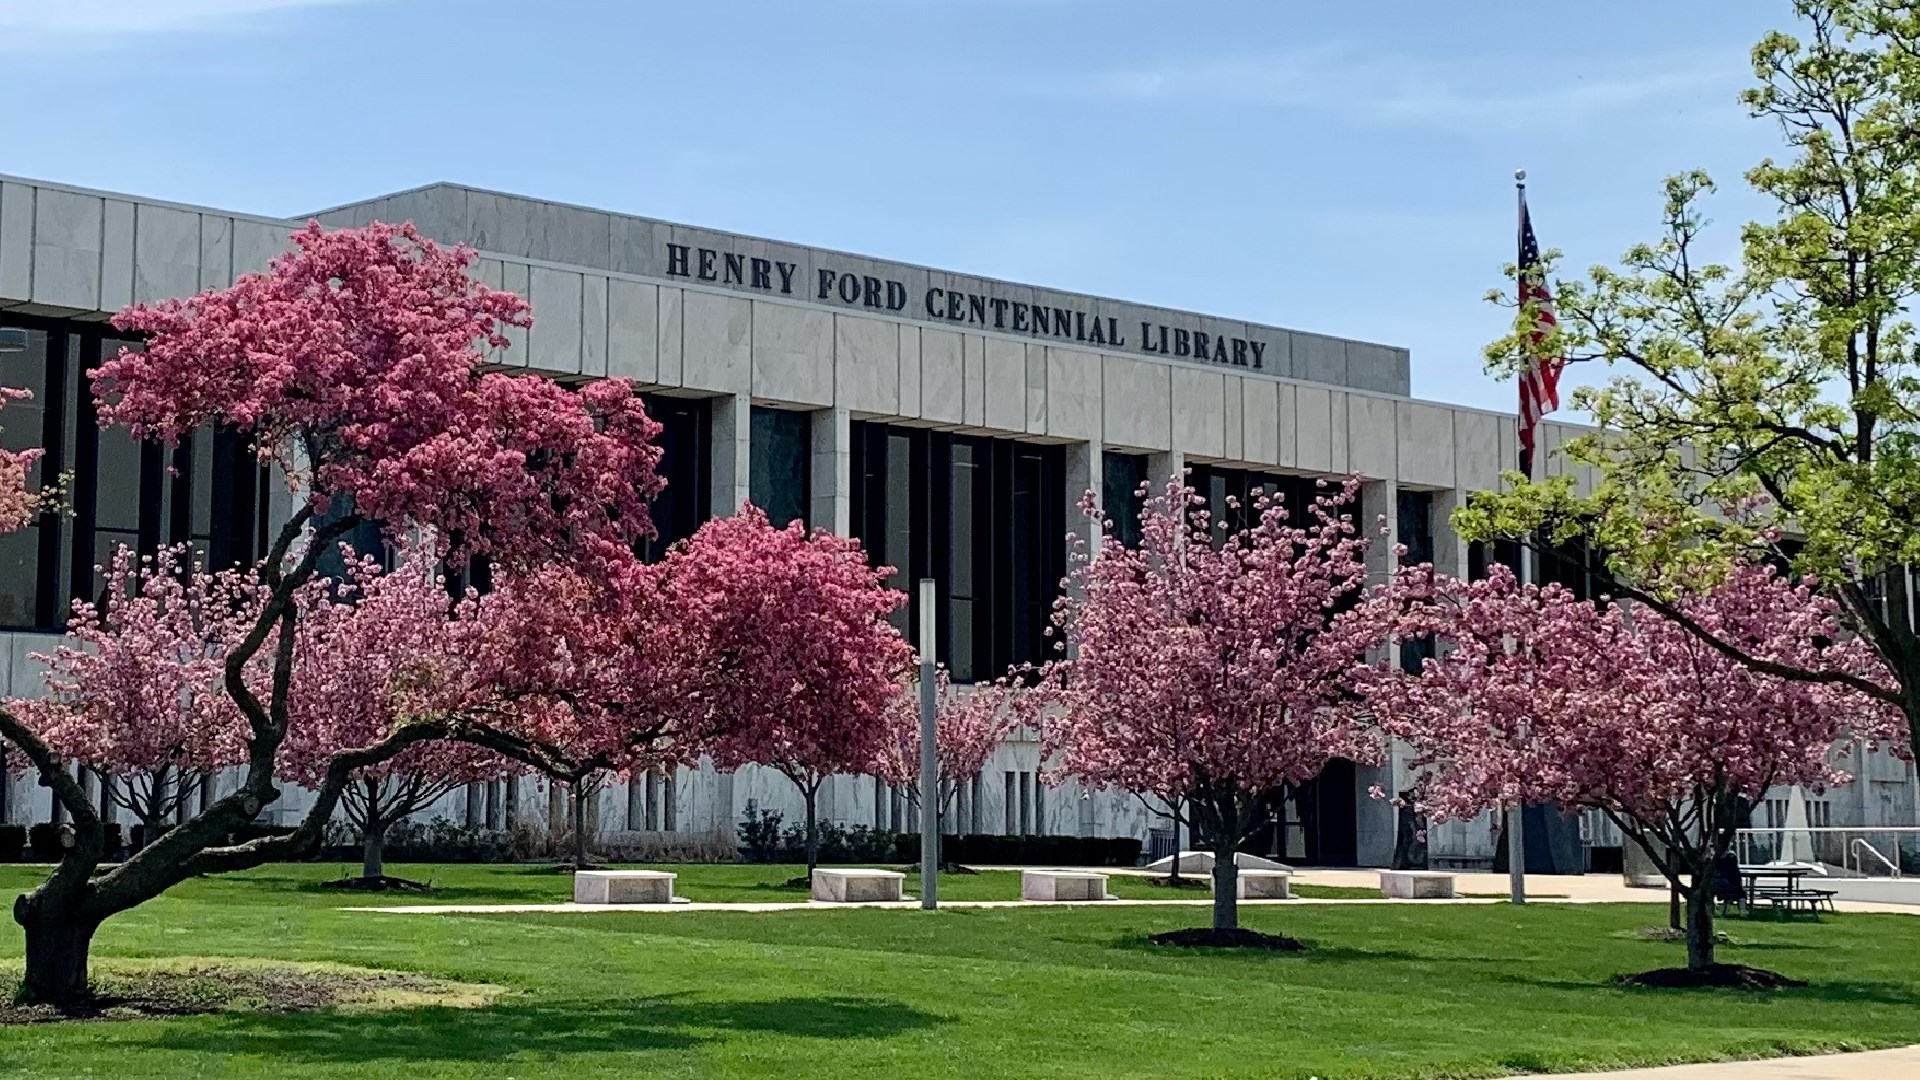 Image of Henry Ford Centennial Library